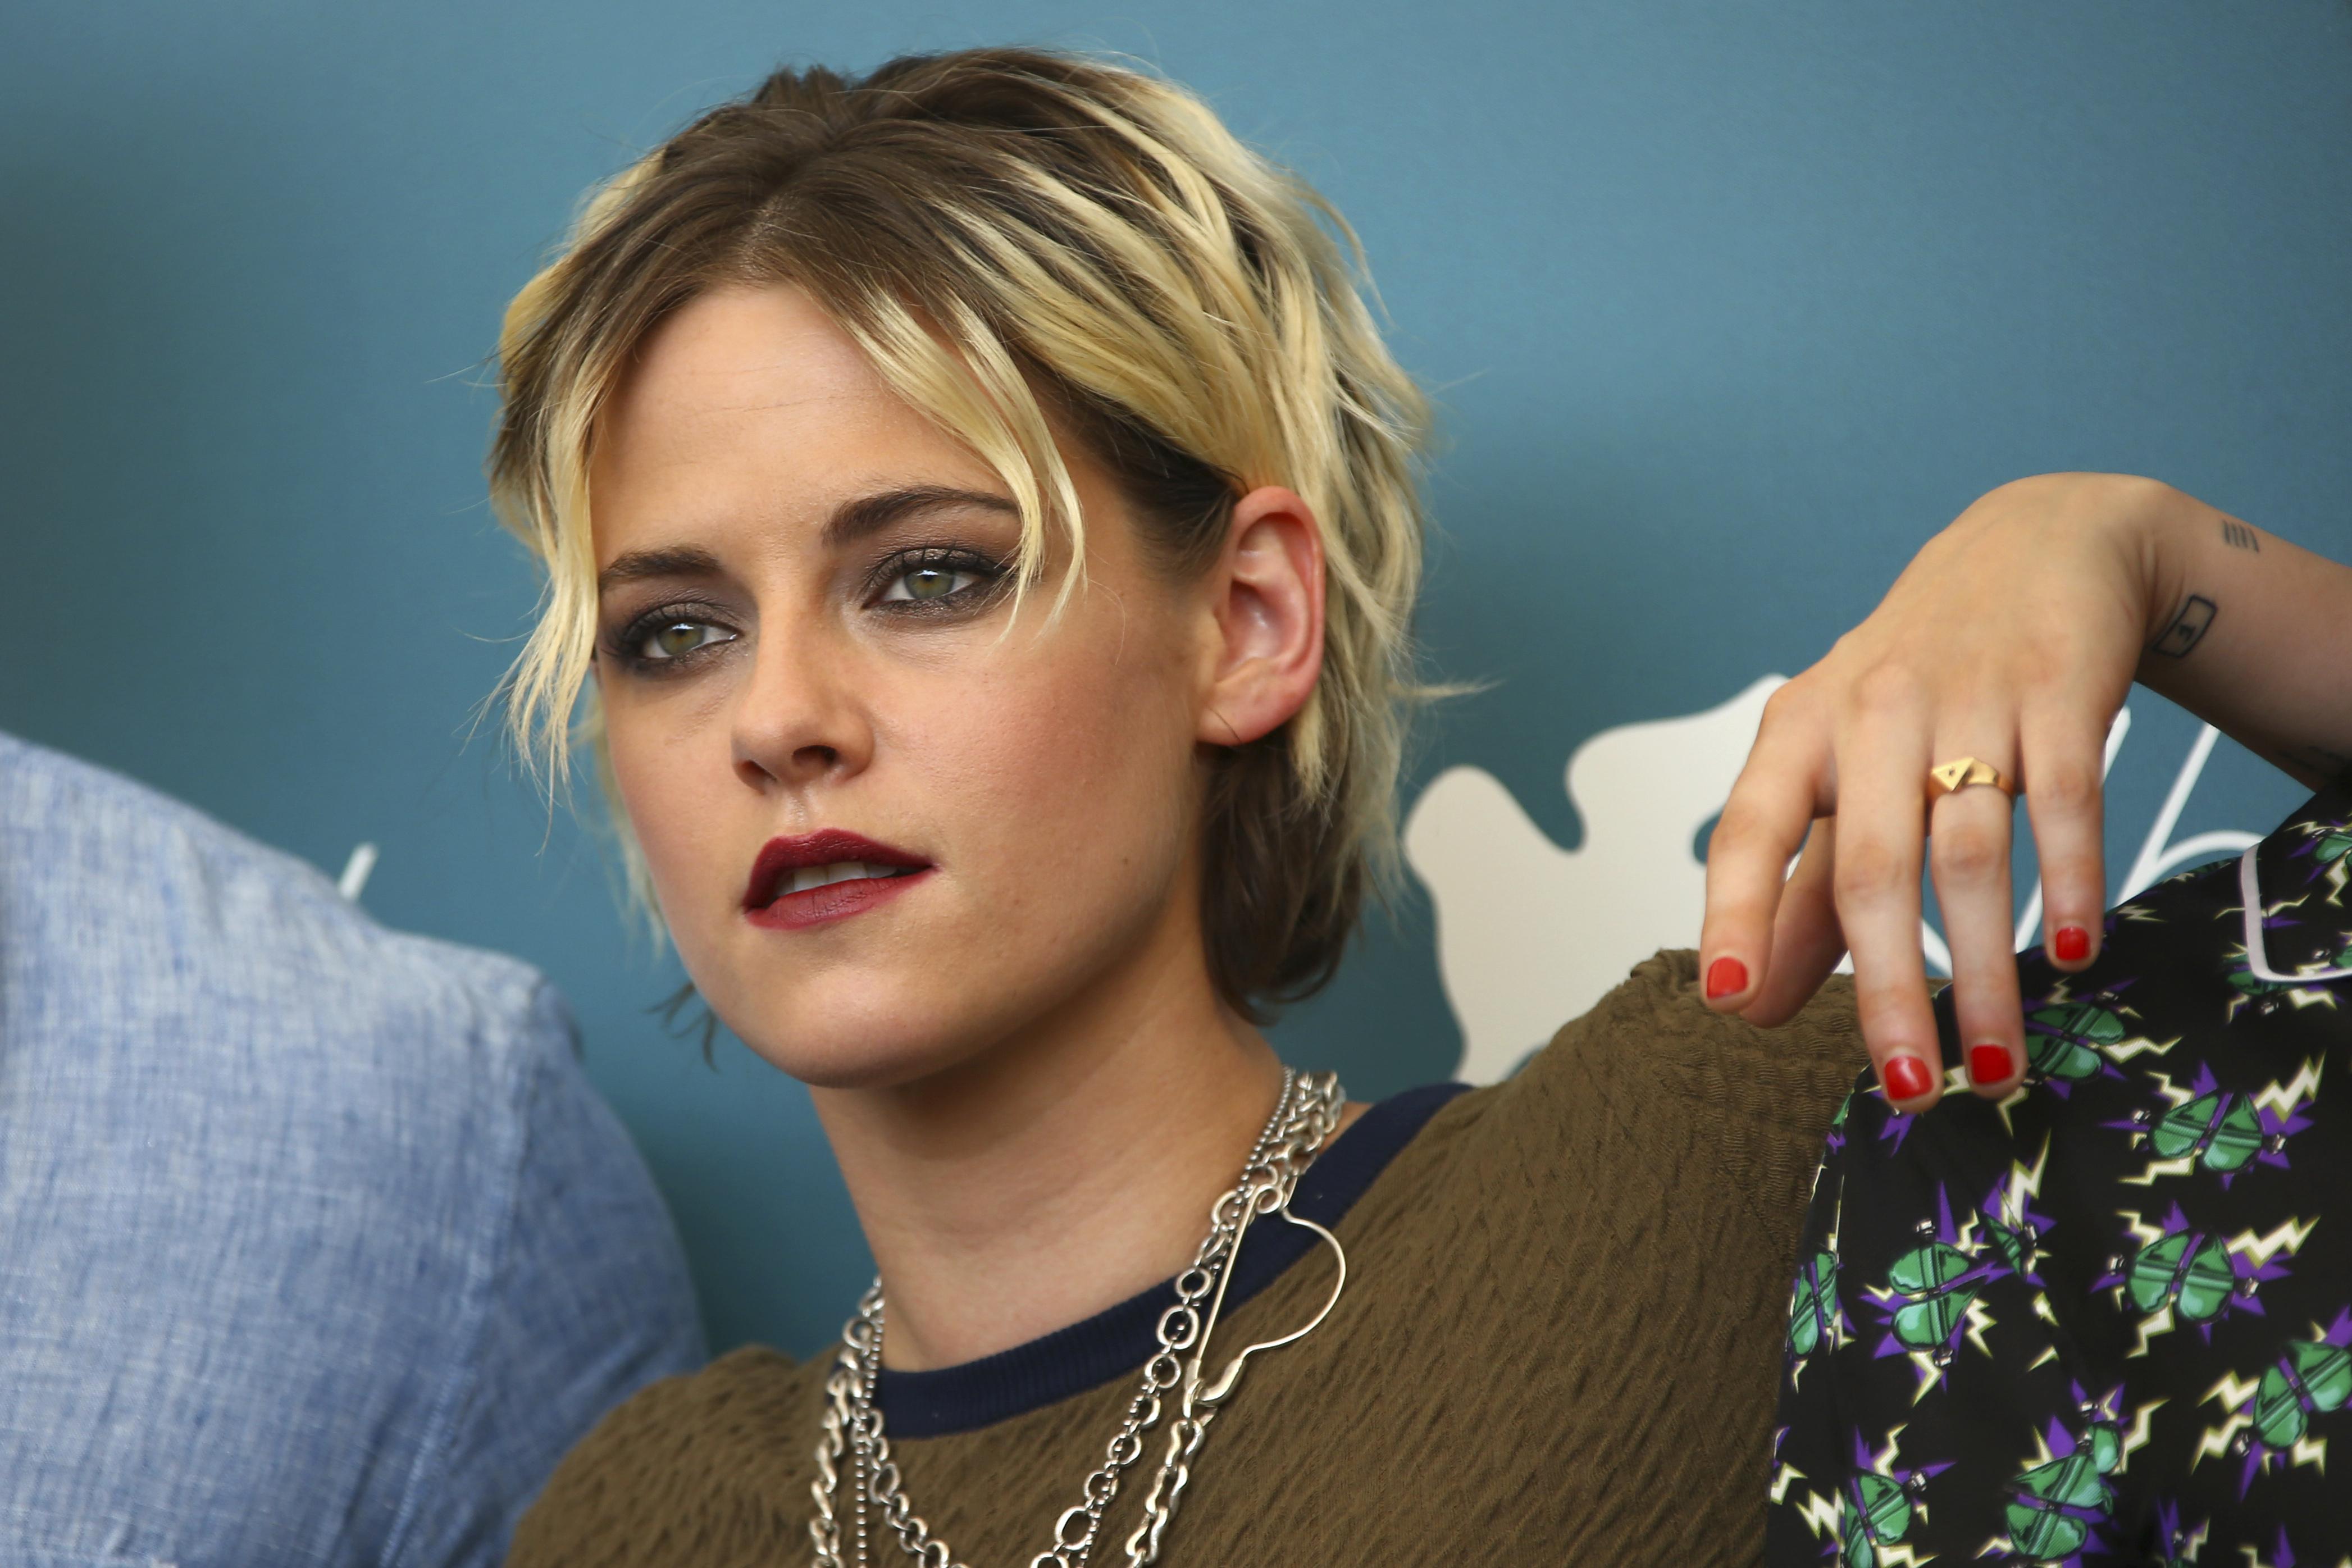 Kristen Stewart's Tweed Outfit At The 2023 Berlin Film Festival Is So Edgy